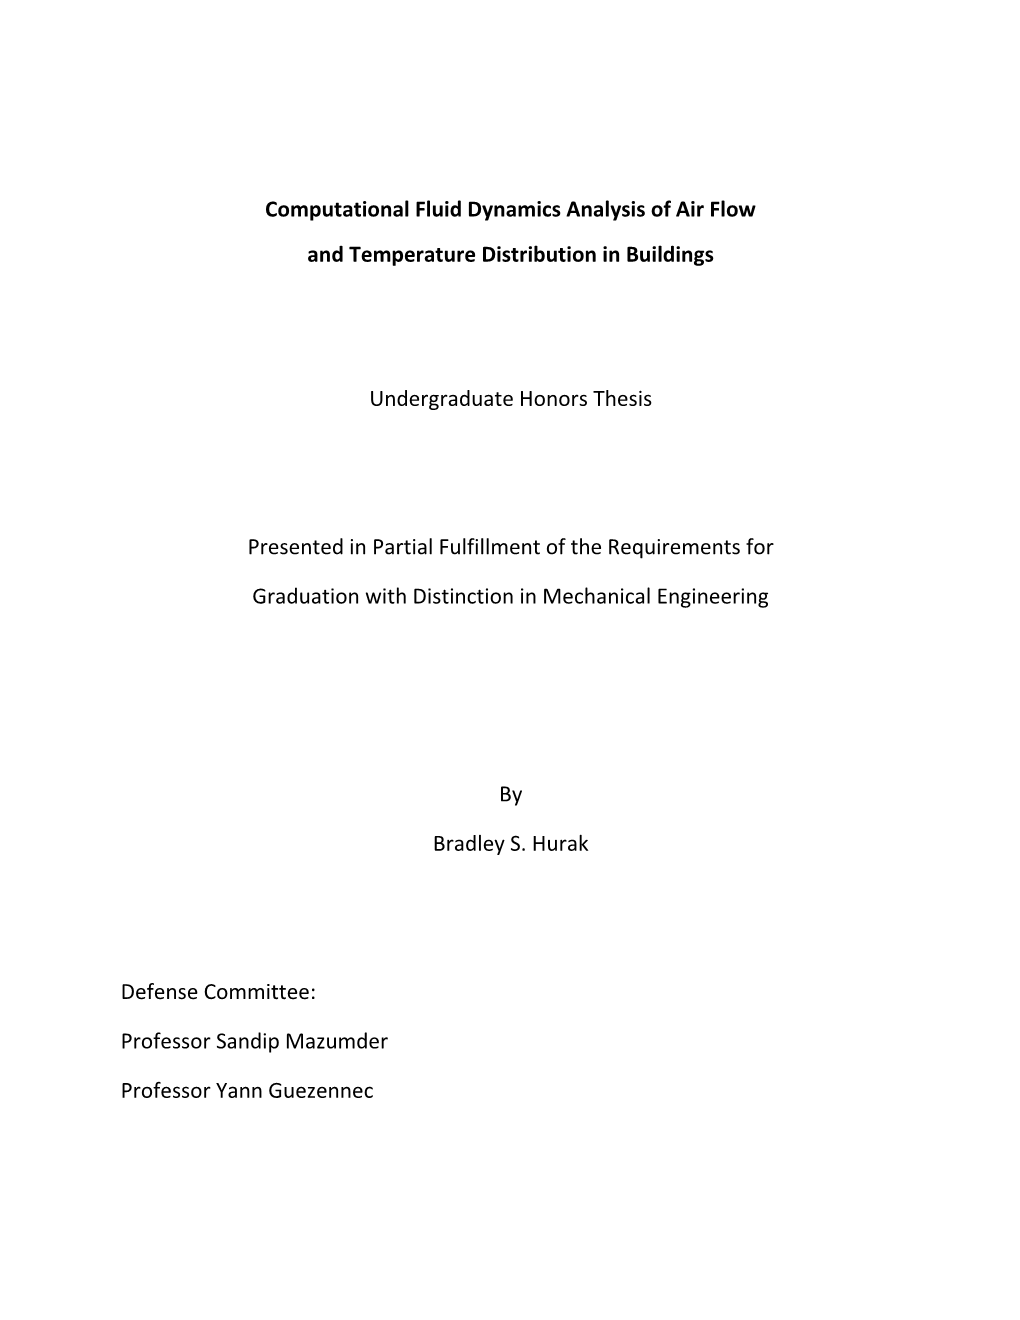 Computational Fluid Dynamics Analysis of Air Flow and Temperature Distribution in Buildings